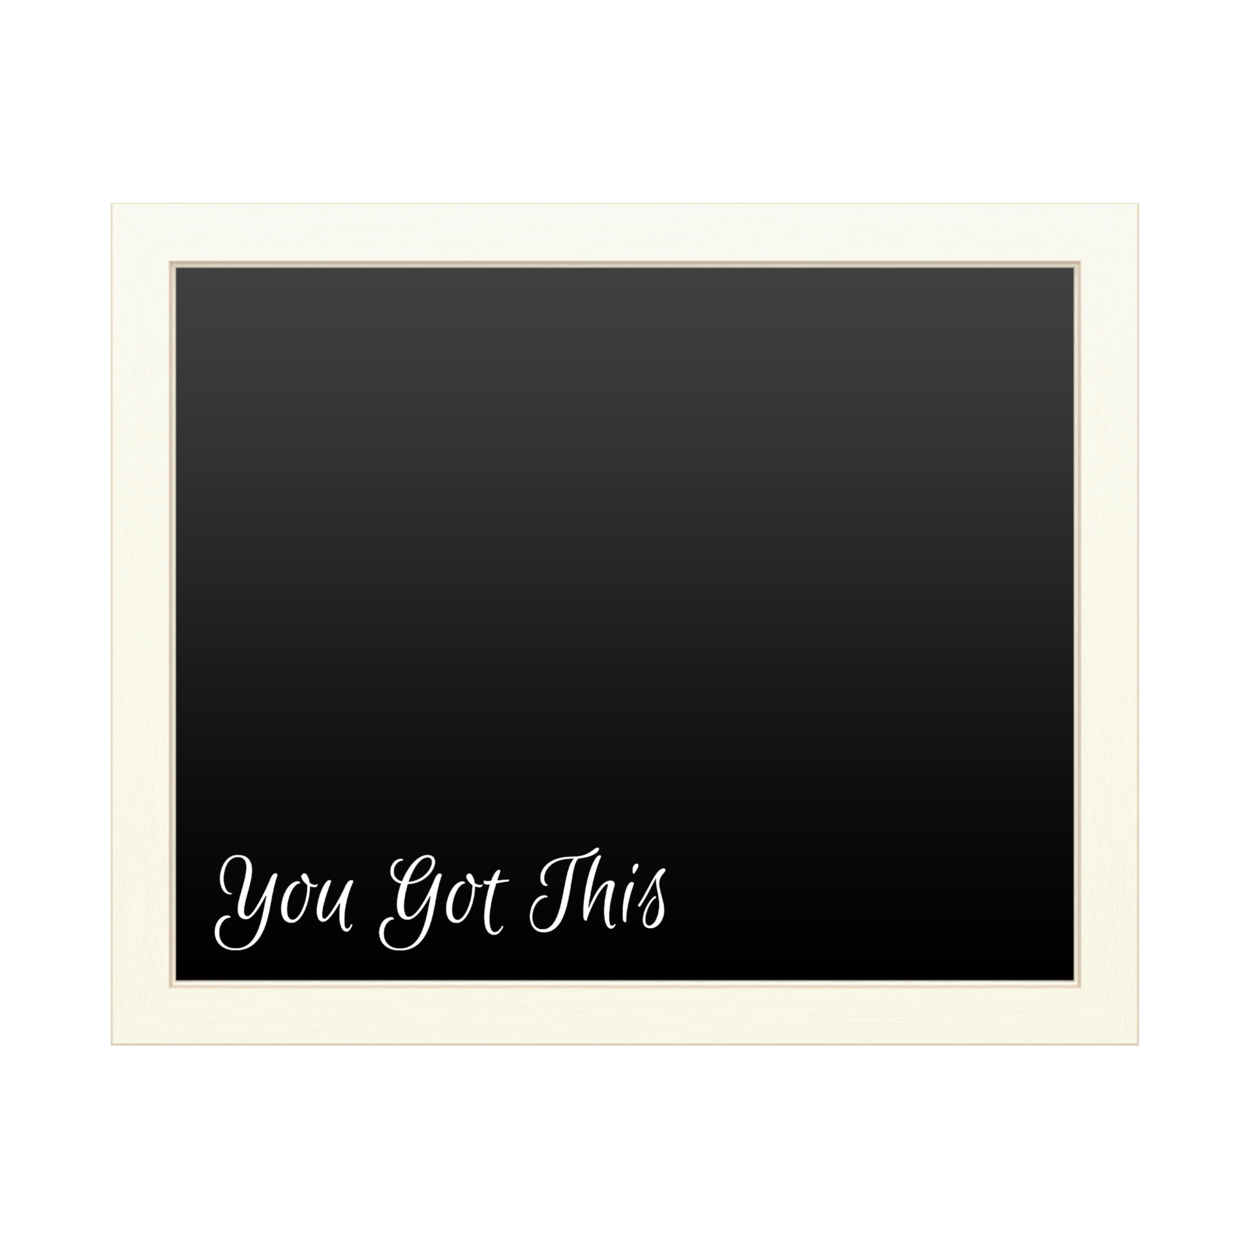 16 X 20 Chalk Board With Printed Artwork - You Got This White Board - Ready To Hang Chalkboard